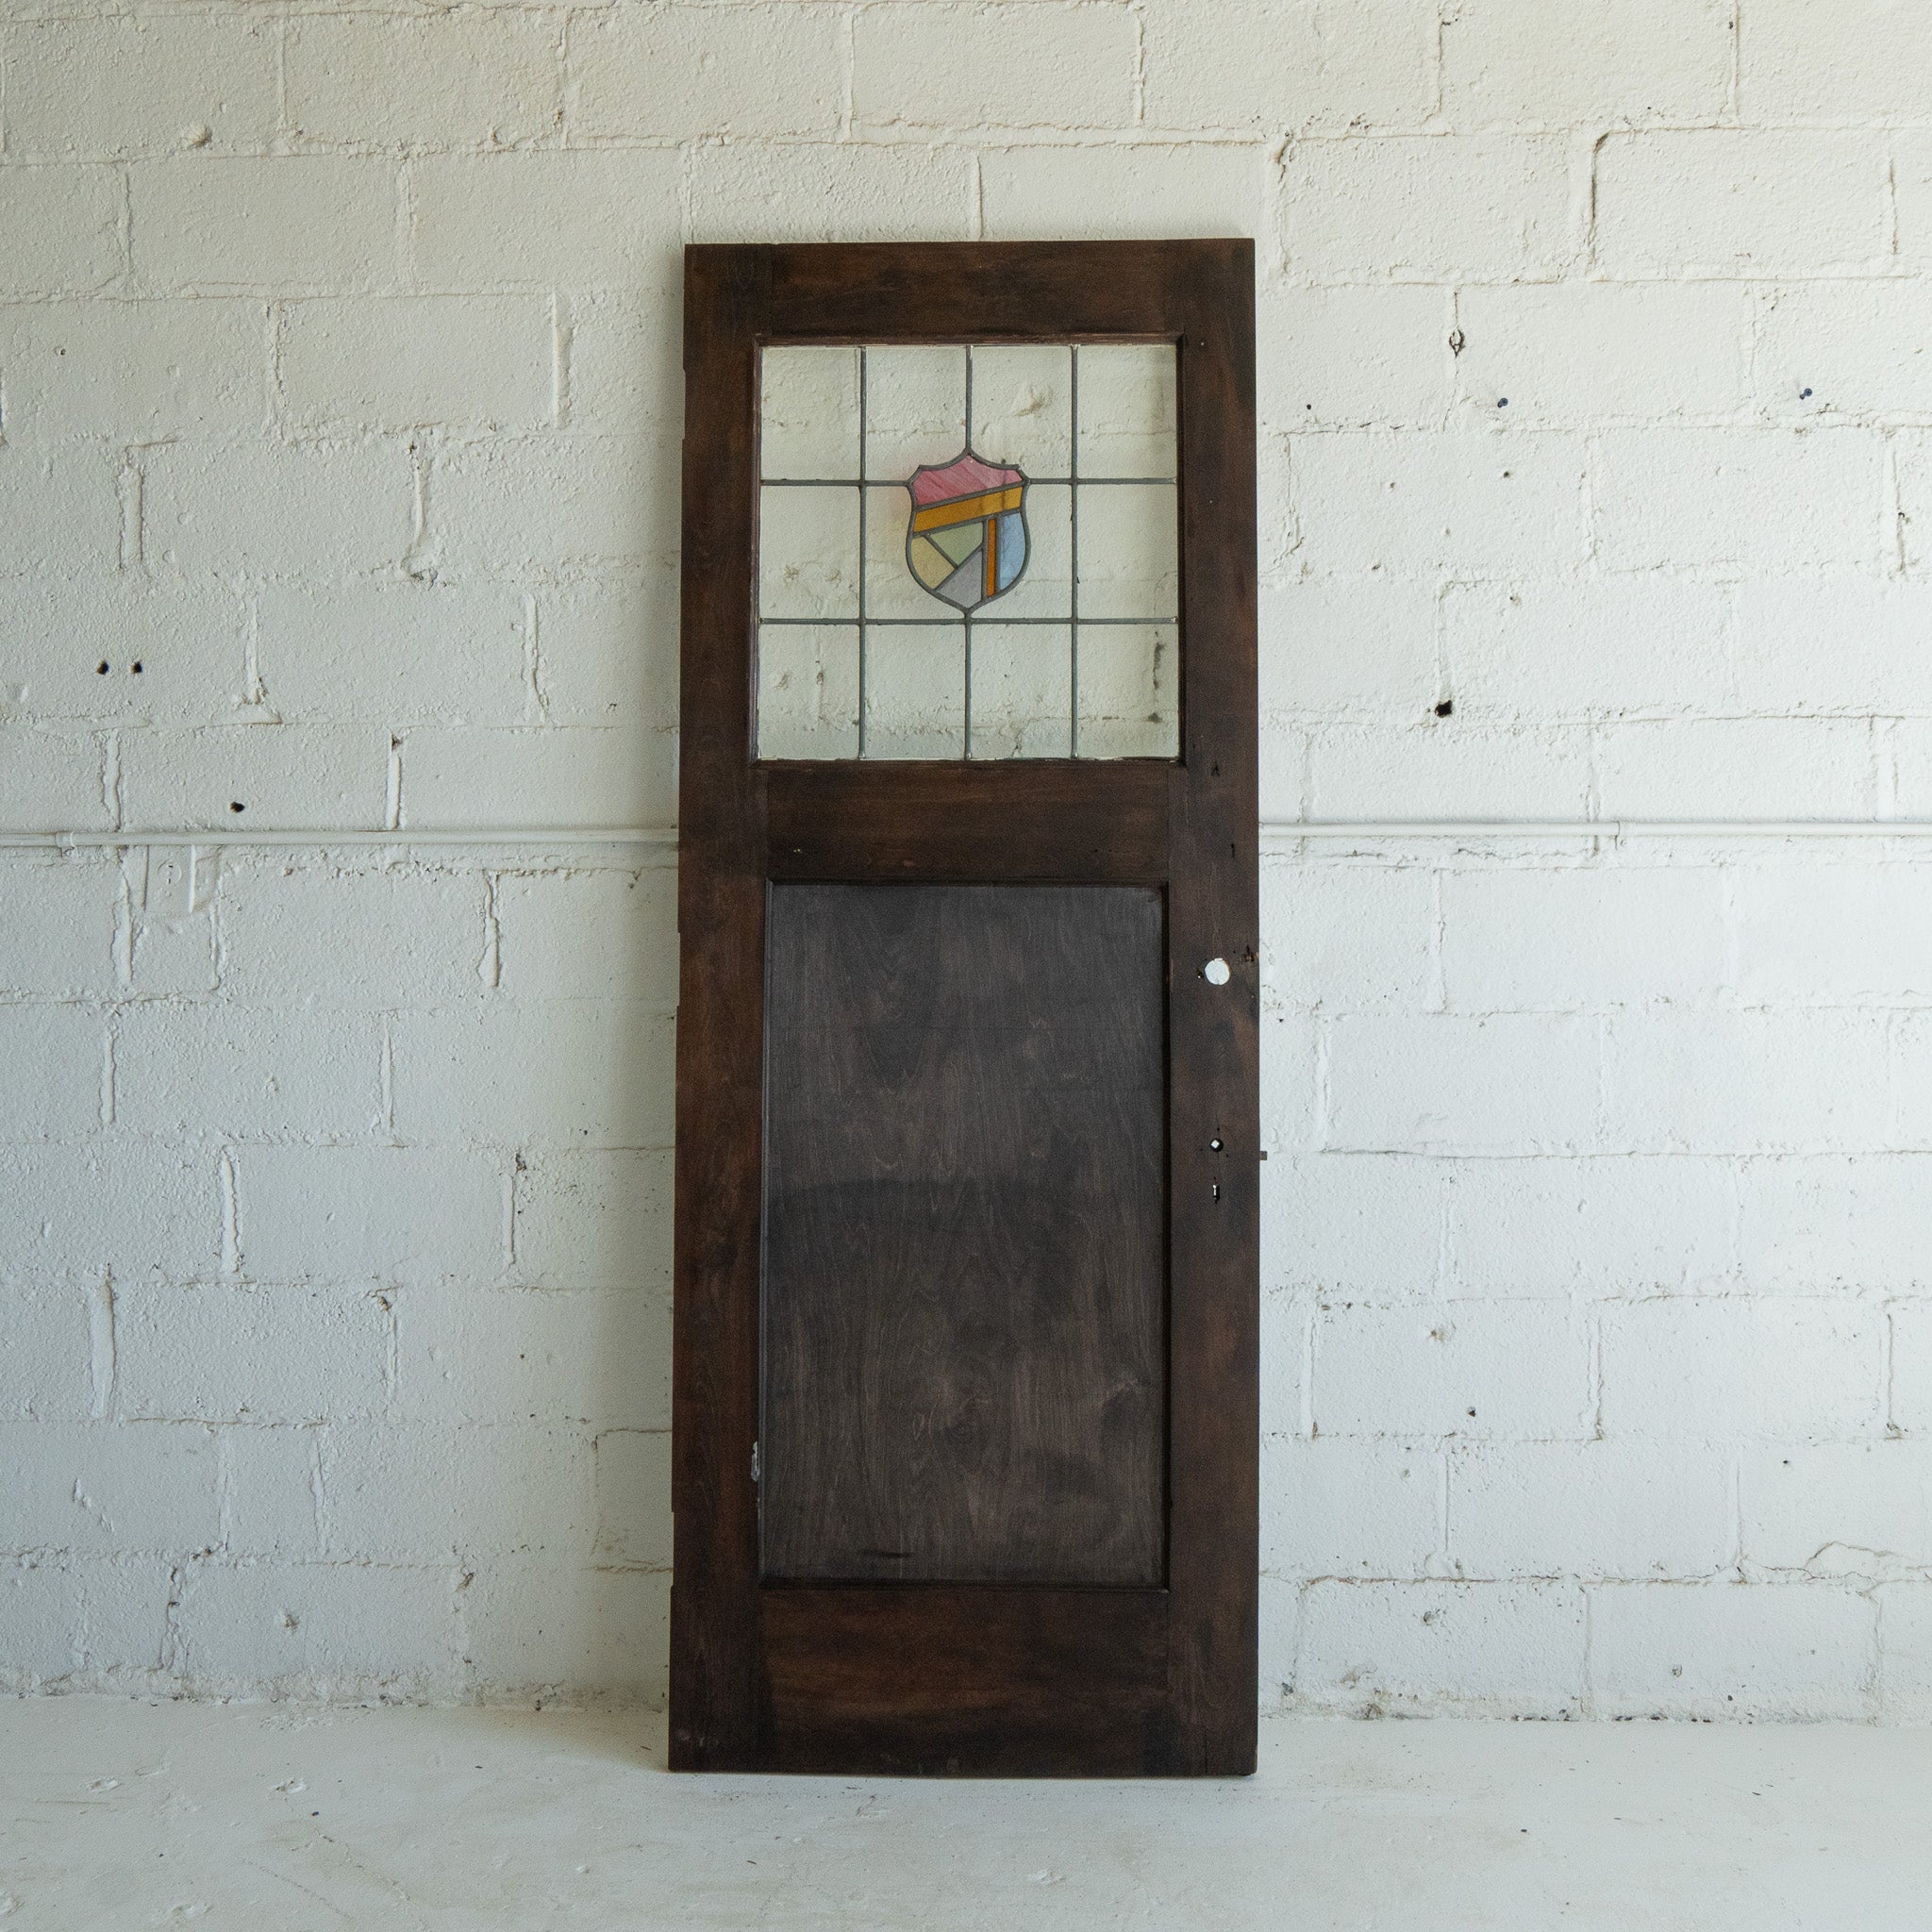 Salvaged Wood door with Stained Glass Window